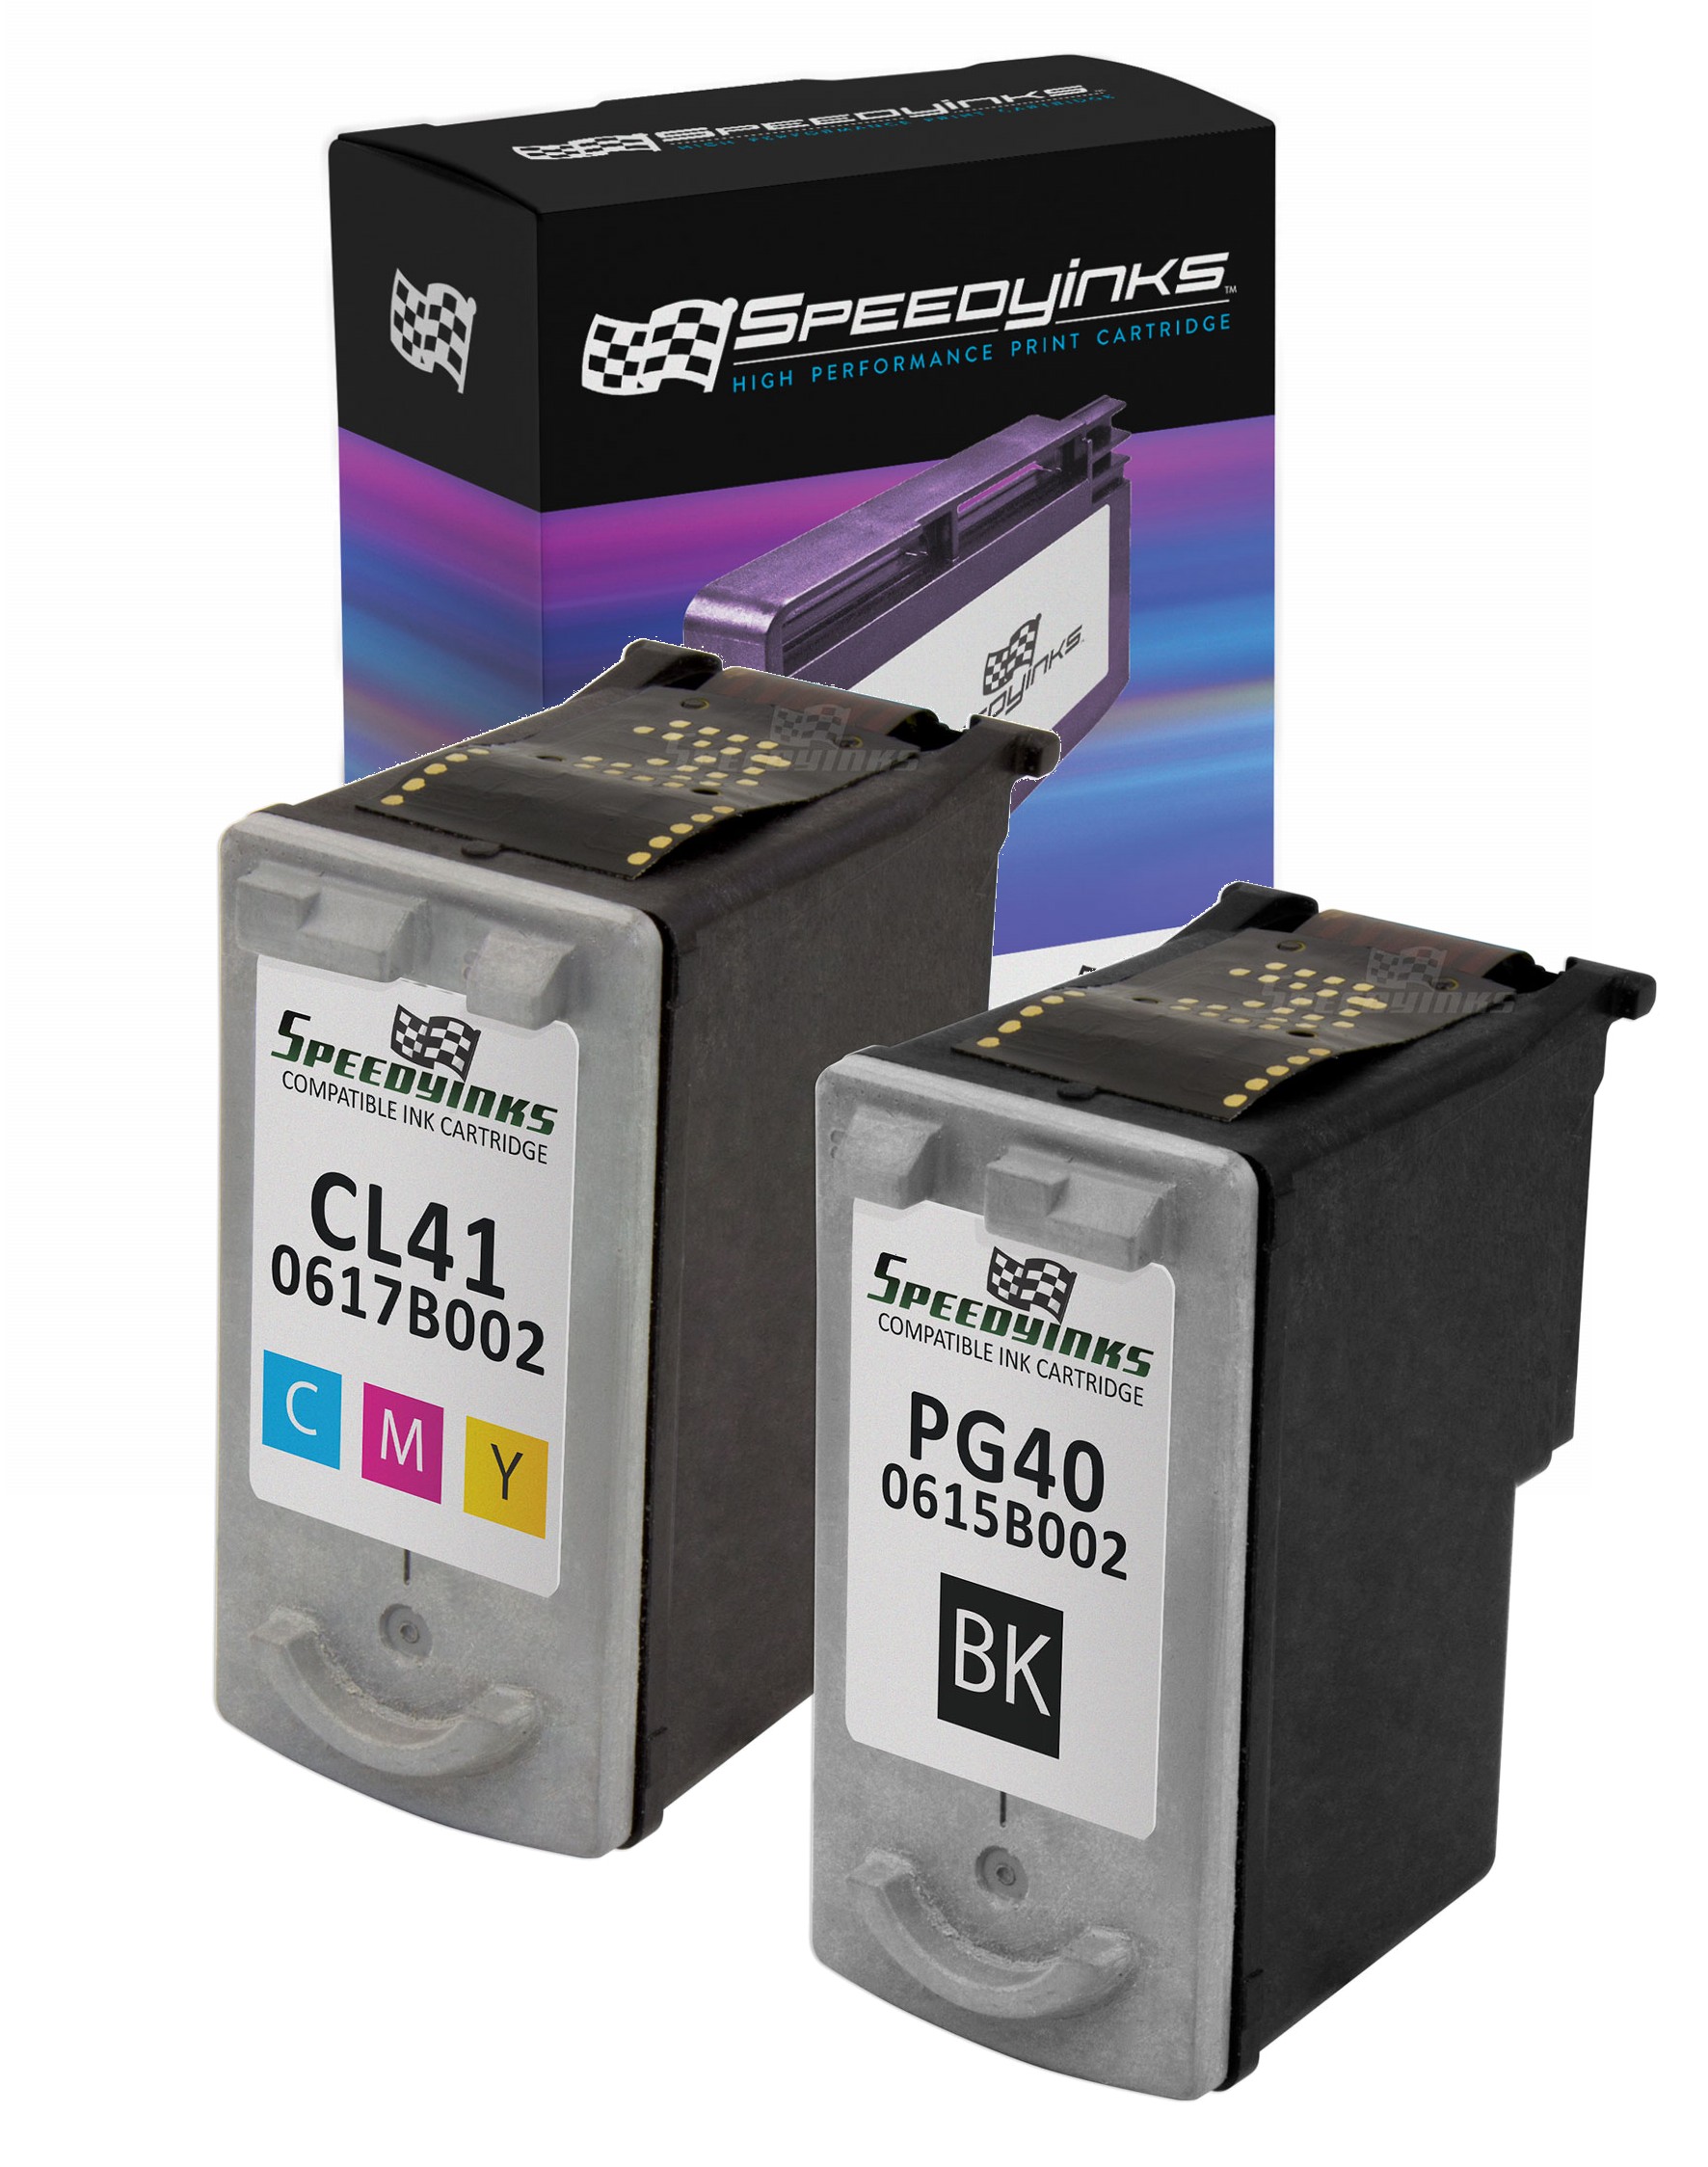 Remanufactured Canon PG40 & CL41 Cartridges For Canon PIXMA iP1700, PIXMA MP460, PIXMA MP450, PIXMA MP140, PIXMA MP180, PIXMA MP190, PIXMA iP2600, Fax Series JX200, PIXMA MP170 - image 1 of 4